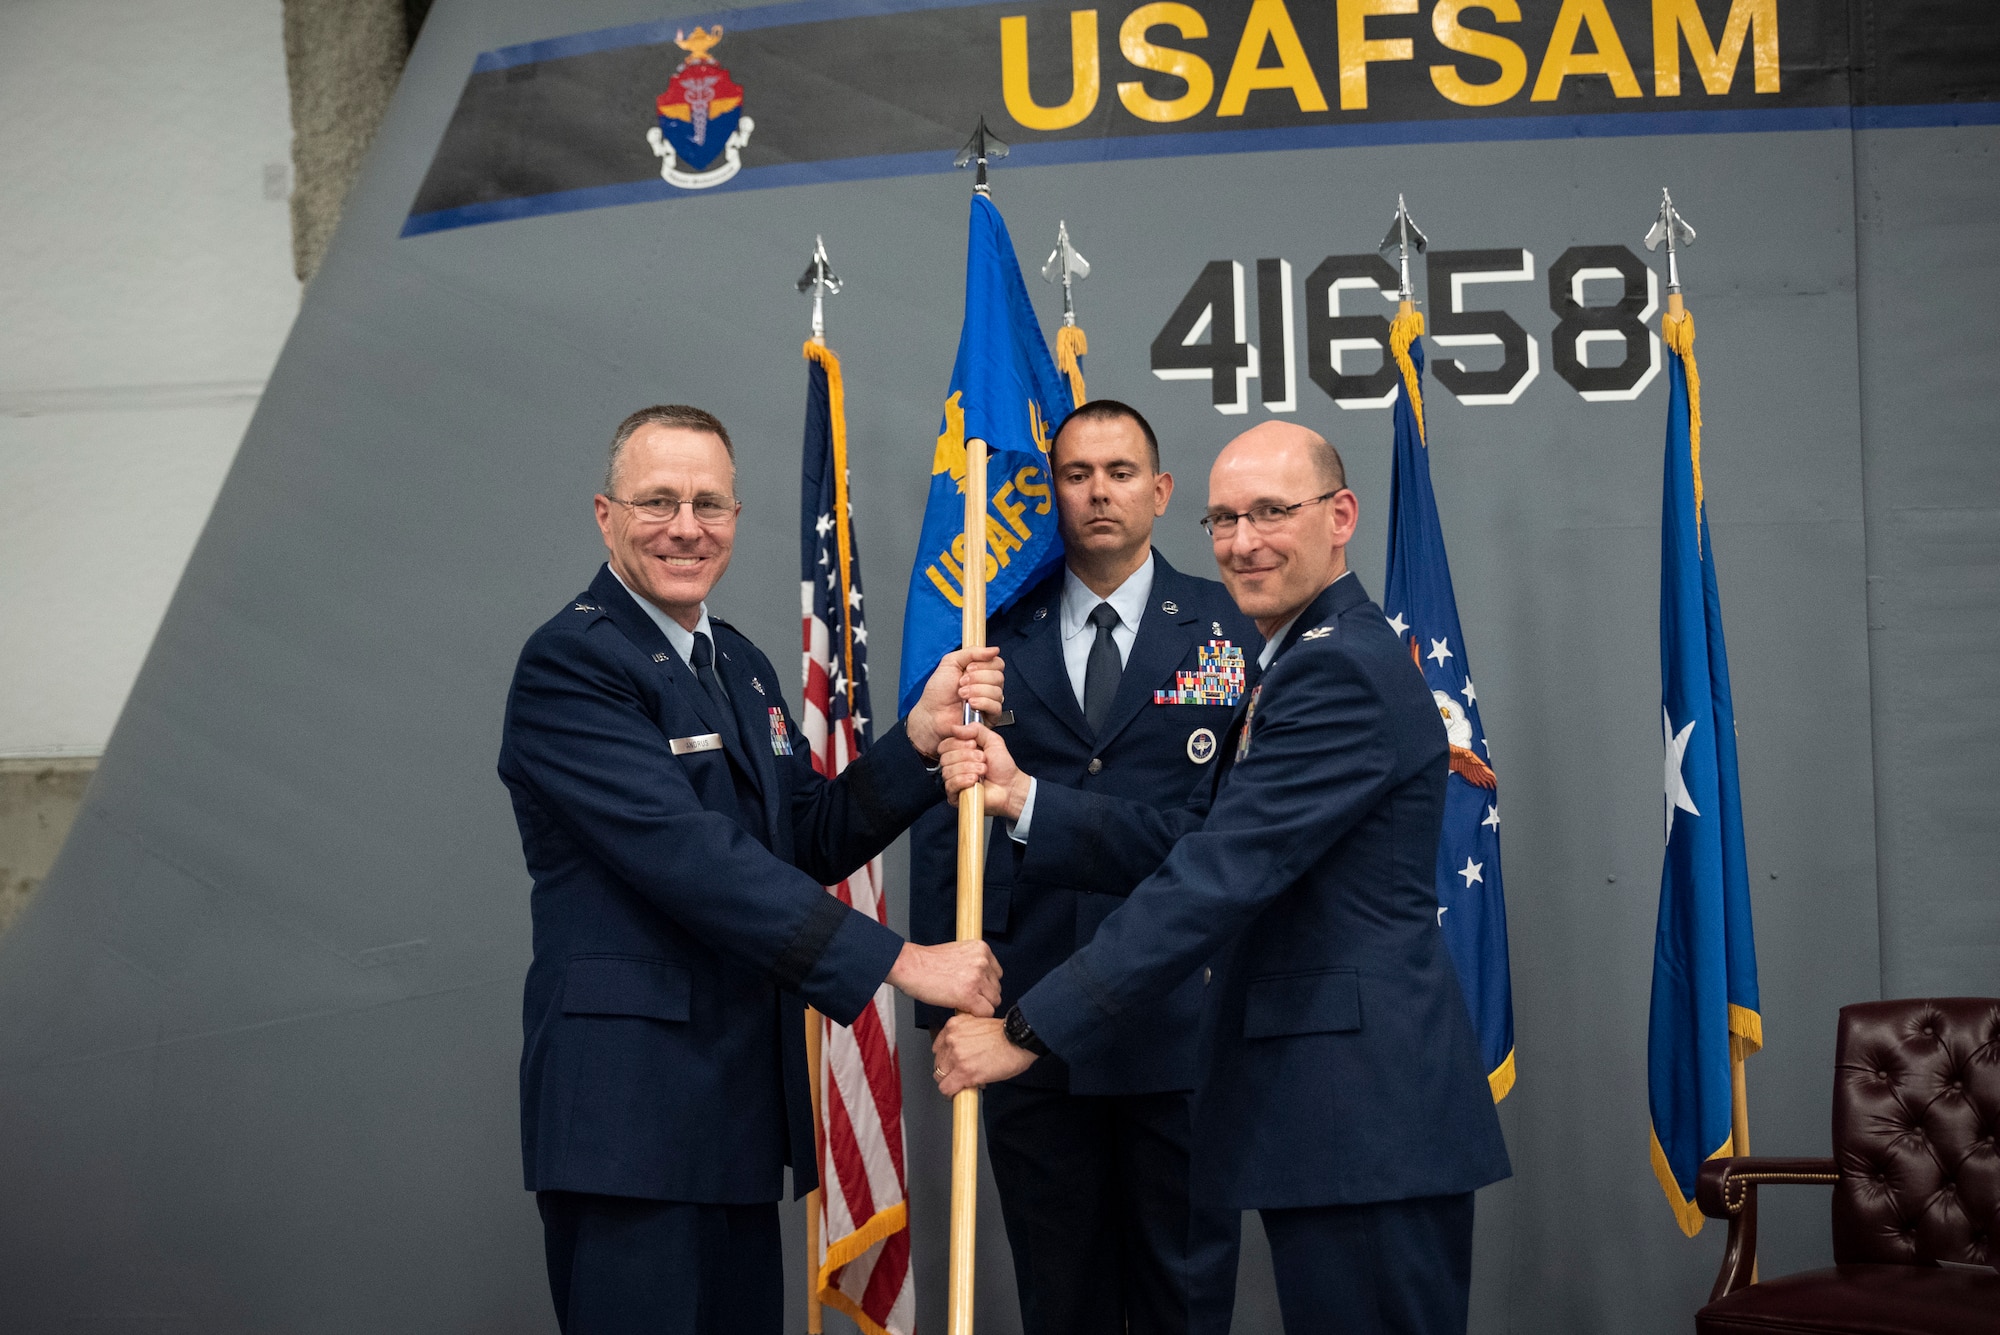 During an assumption of command ceremony July 19, 2021, Brig. Gen. John Andrus, 711th Human Performance Wing commander, passes the flag to Col. Tory Woodard, the newest commander of the United States Air Force School of Aerospace Medicine, signifying the school’s change of command. USAFSAM is one of two mission units in the Air Force Research Laboratory’s 711th Human Performance Wing. (U.S. Air Force photo/Richard Eldridge)